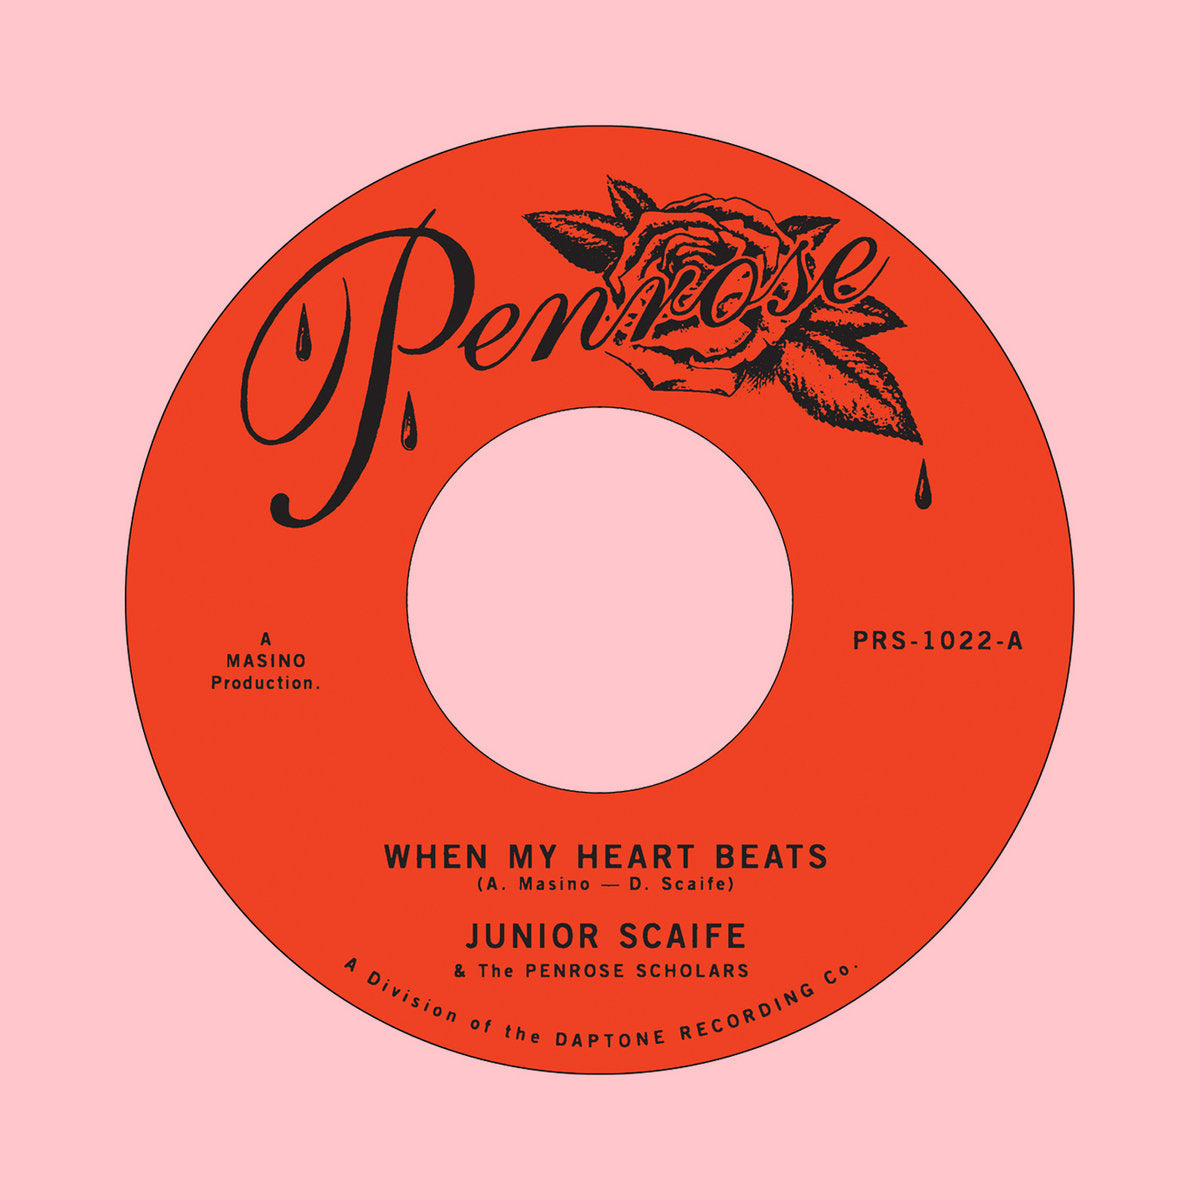 JUNIOR SCAIFE - WHEN MY HEART BEATS b/w MOMENT TO MOMENT Vinyl 7"